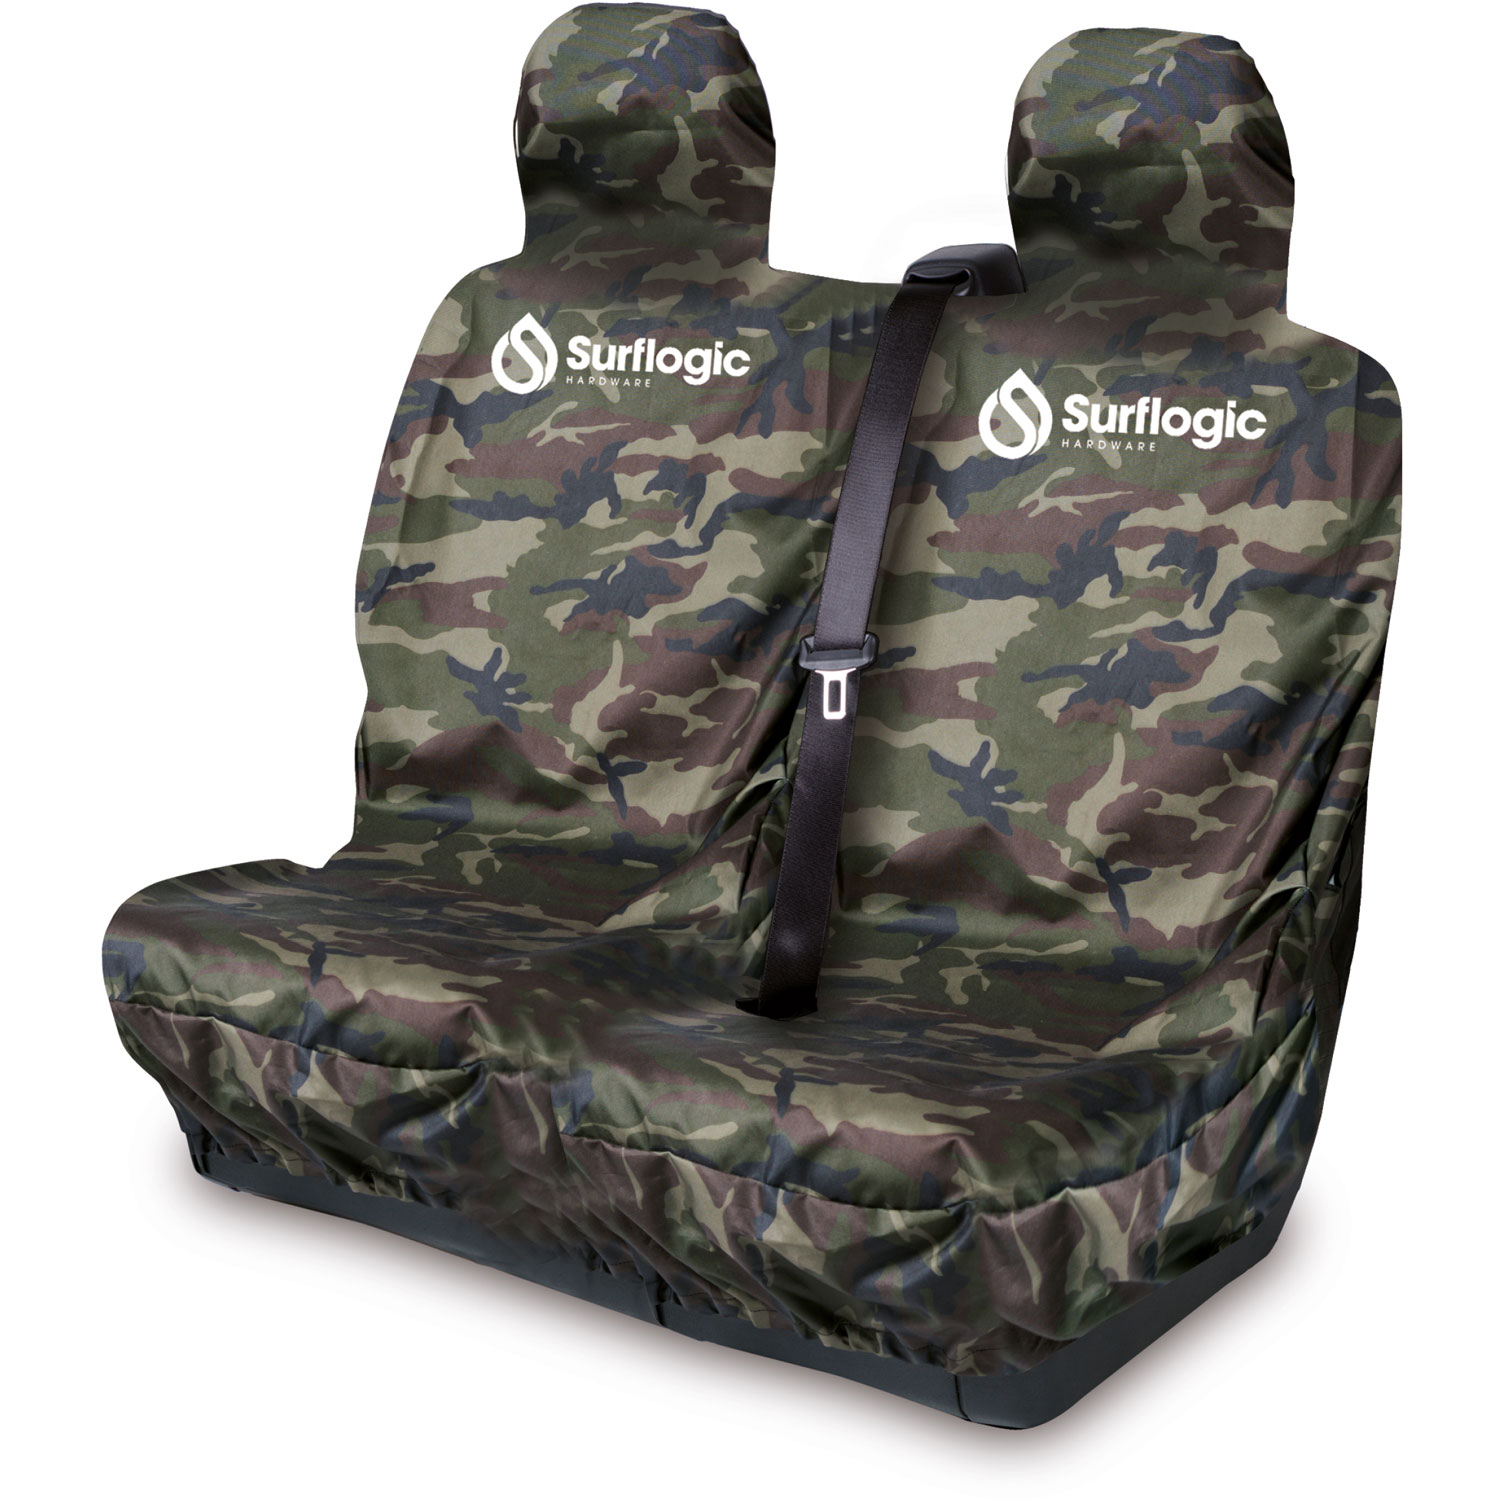 https://www.coastwatersports.de/images/products/Surf-Logic-van-Seat-cover-double-camo.jpg